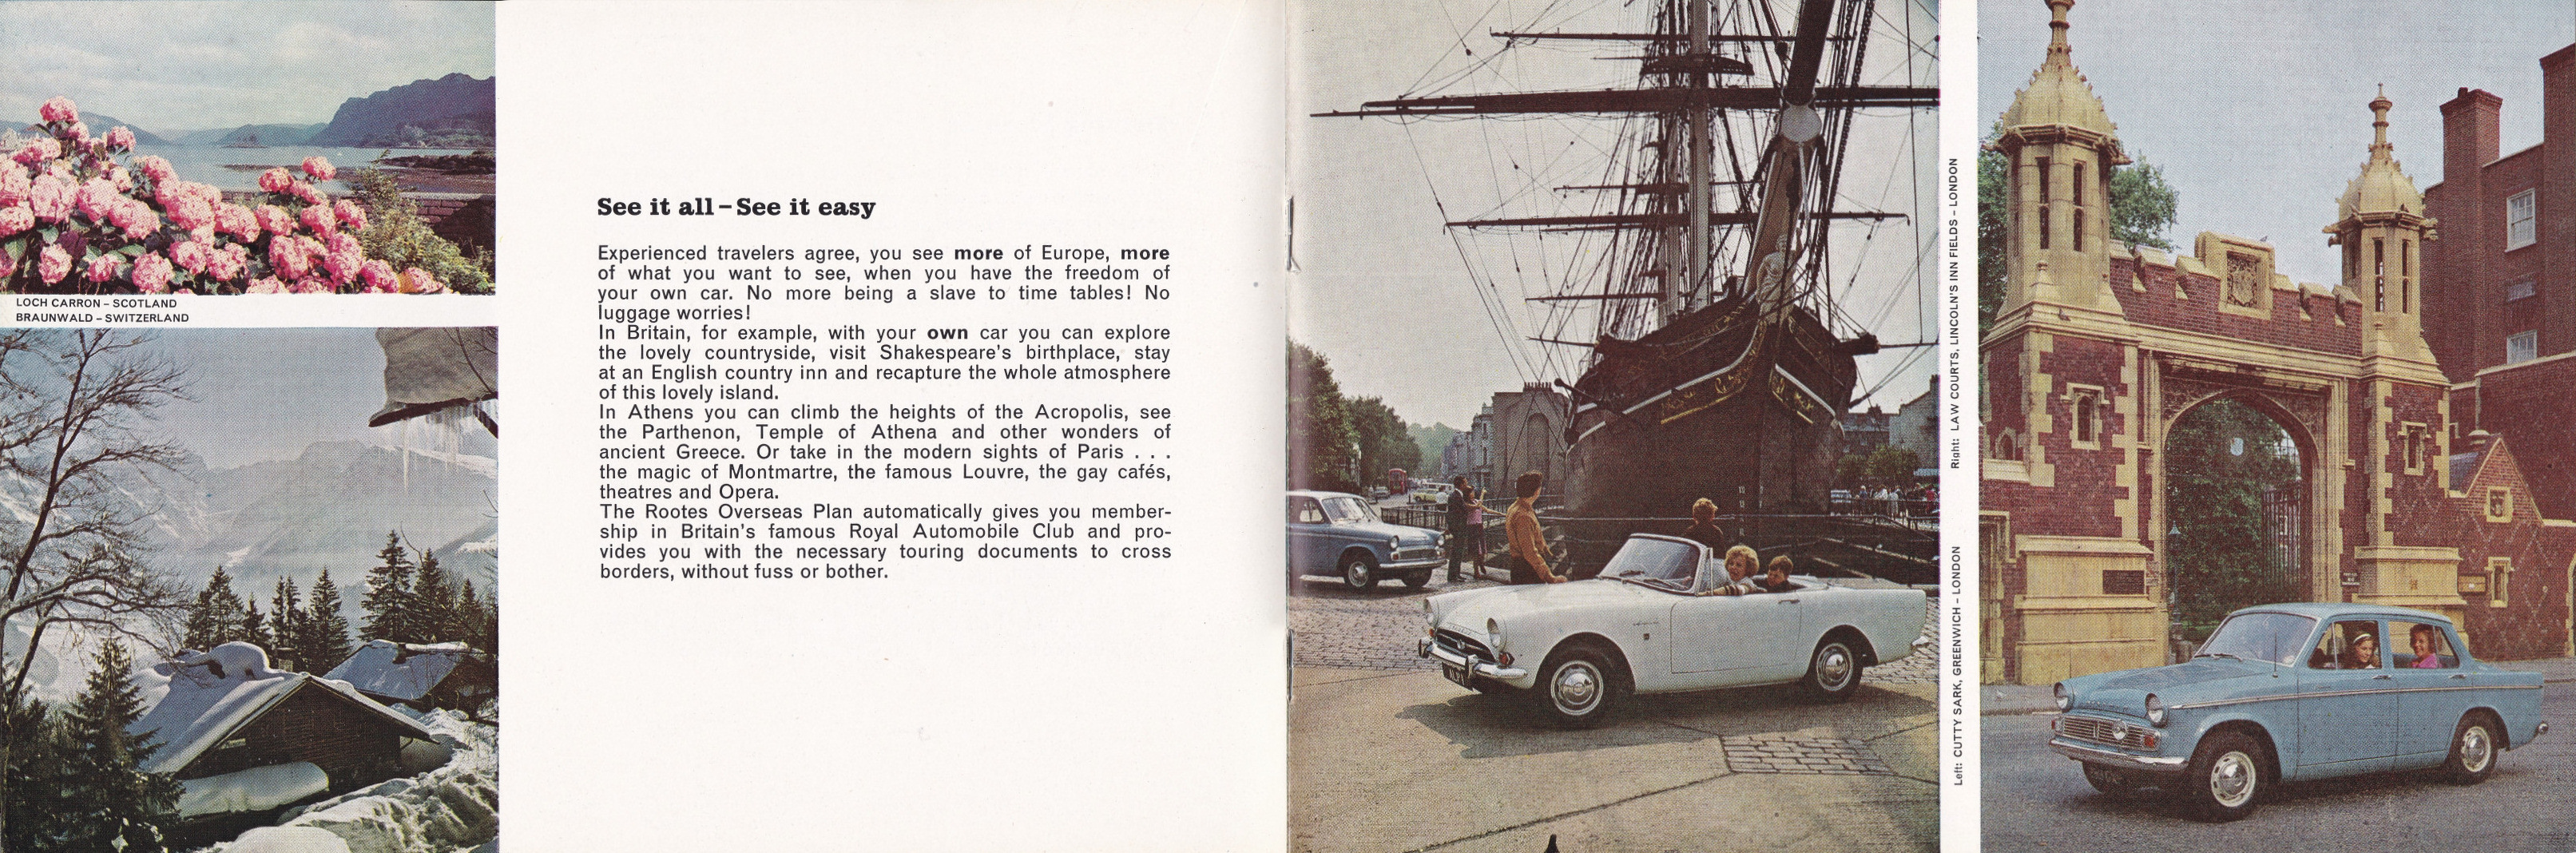 1966_Rootes_Overseas_Delivery-08-09